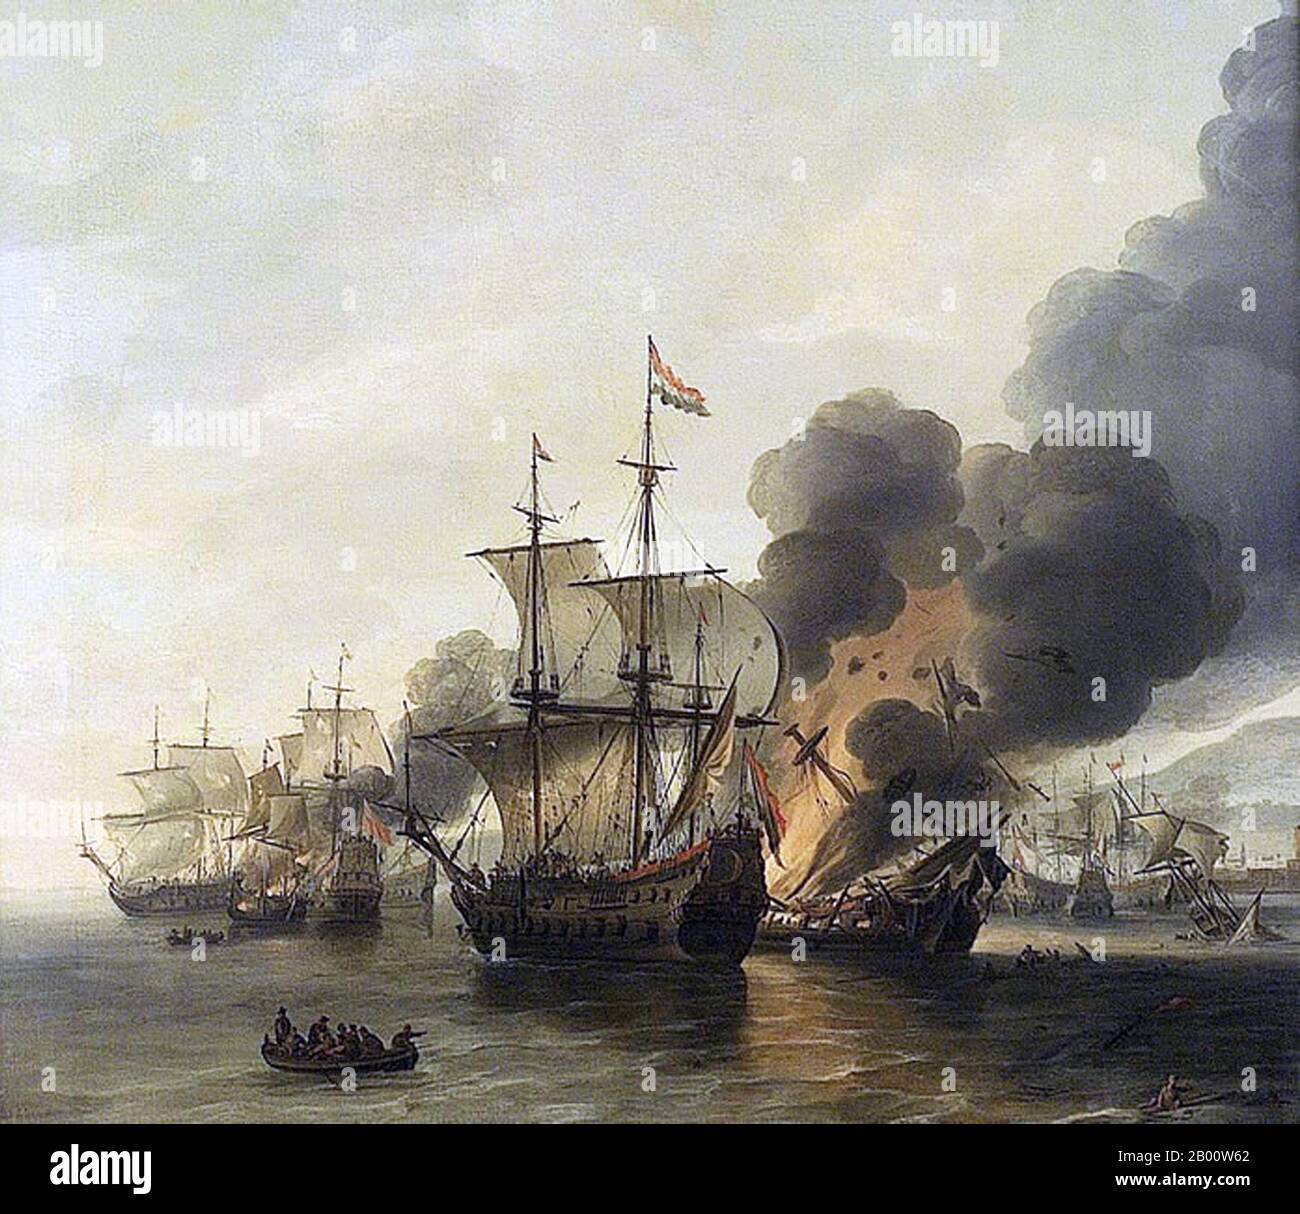 Maritime: 'The Battle of Leghorn, 4 March 1653'. Oil on canvas painting by Willem Hermansz van Diest (c. 1600-1678), mid-17th century.  The naval Battle of Leghorn (the Dutch call the encounter by the Italian name Livorno) took place on 14 March (4 March Old Style) 1653, during the First Anglo-Dutch War, near Leghorn (Livorno), Italy. It was a victory of a Dutch fleet under Commodore Johan van Galen over an English squadron under Captain Henry Appleton. Afterward an English fleet under Captain Richard Badiley, which Appleton had been trying to reach, came up but was outnumbered and fled. Stock Photo